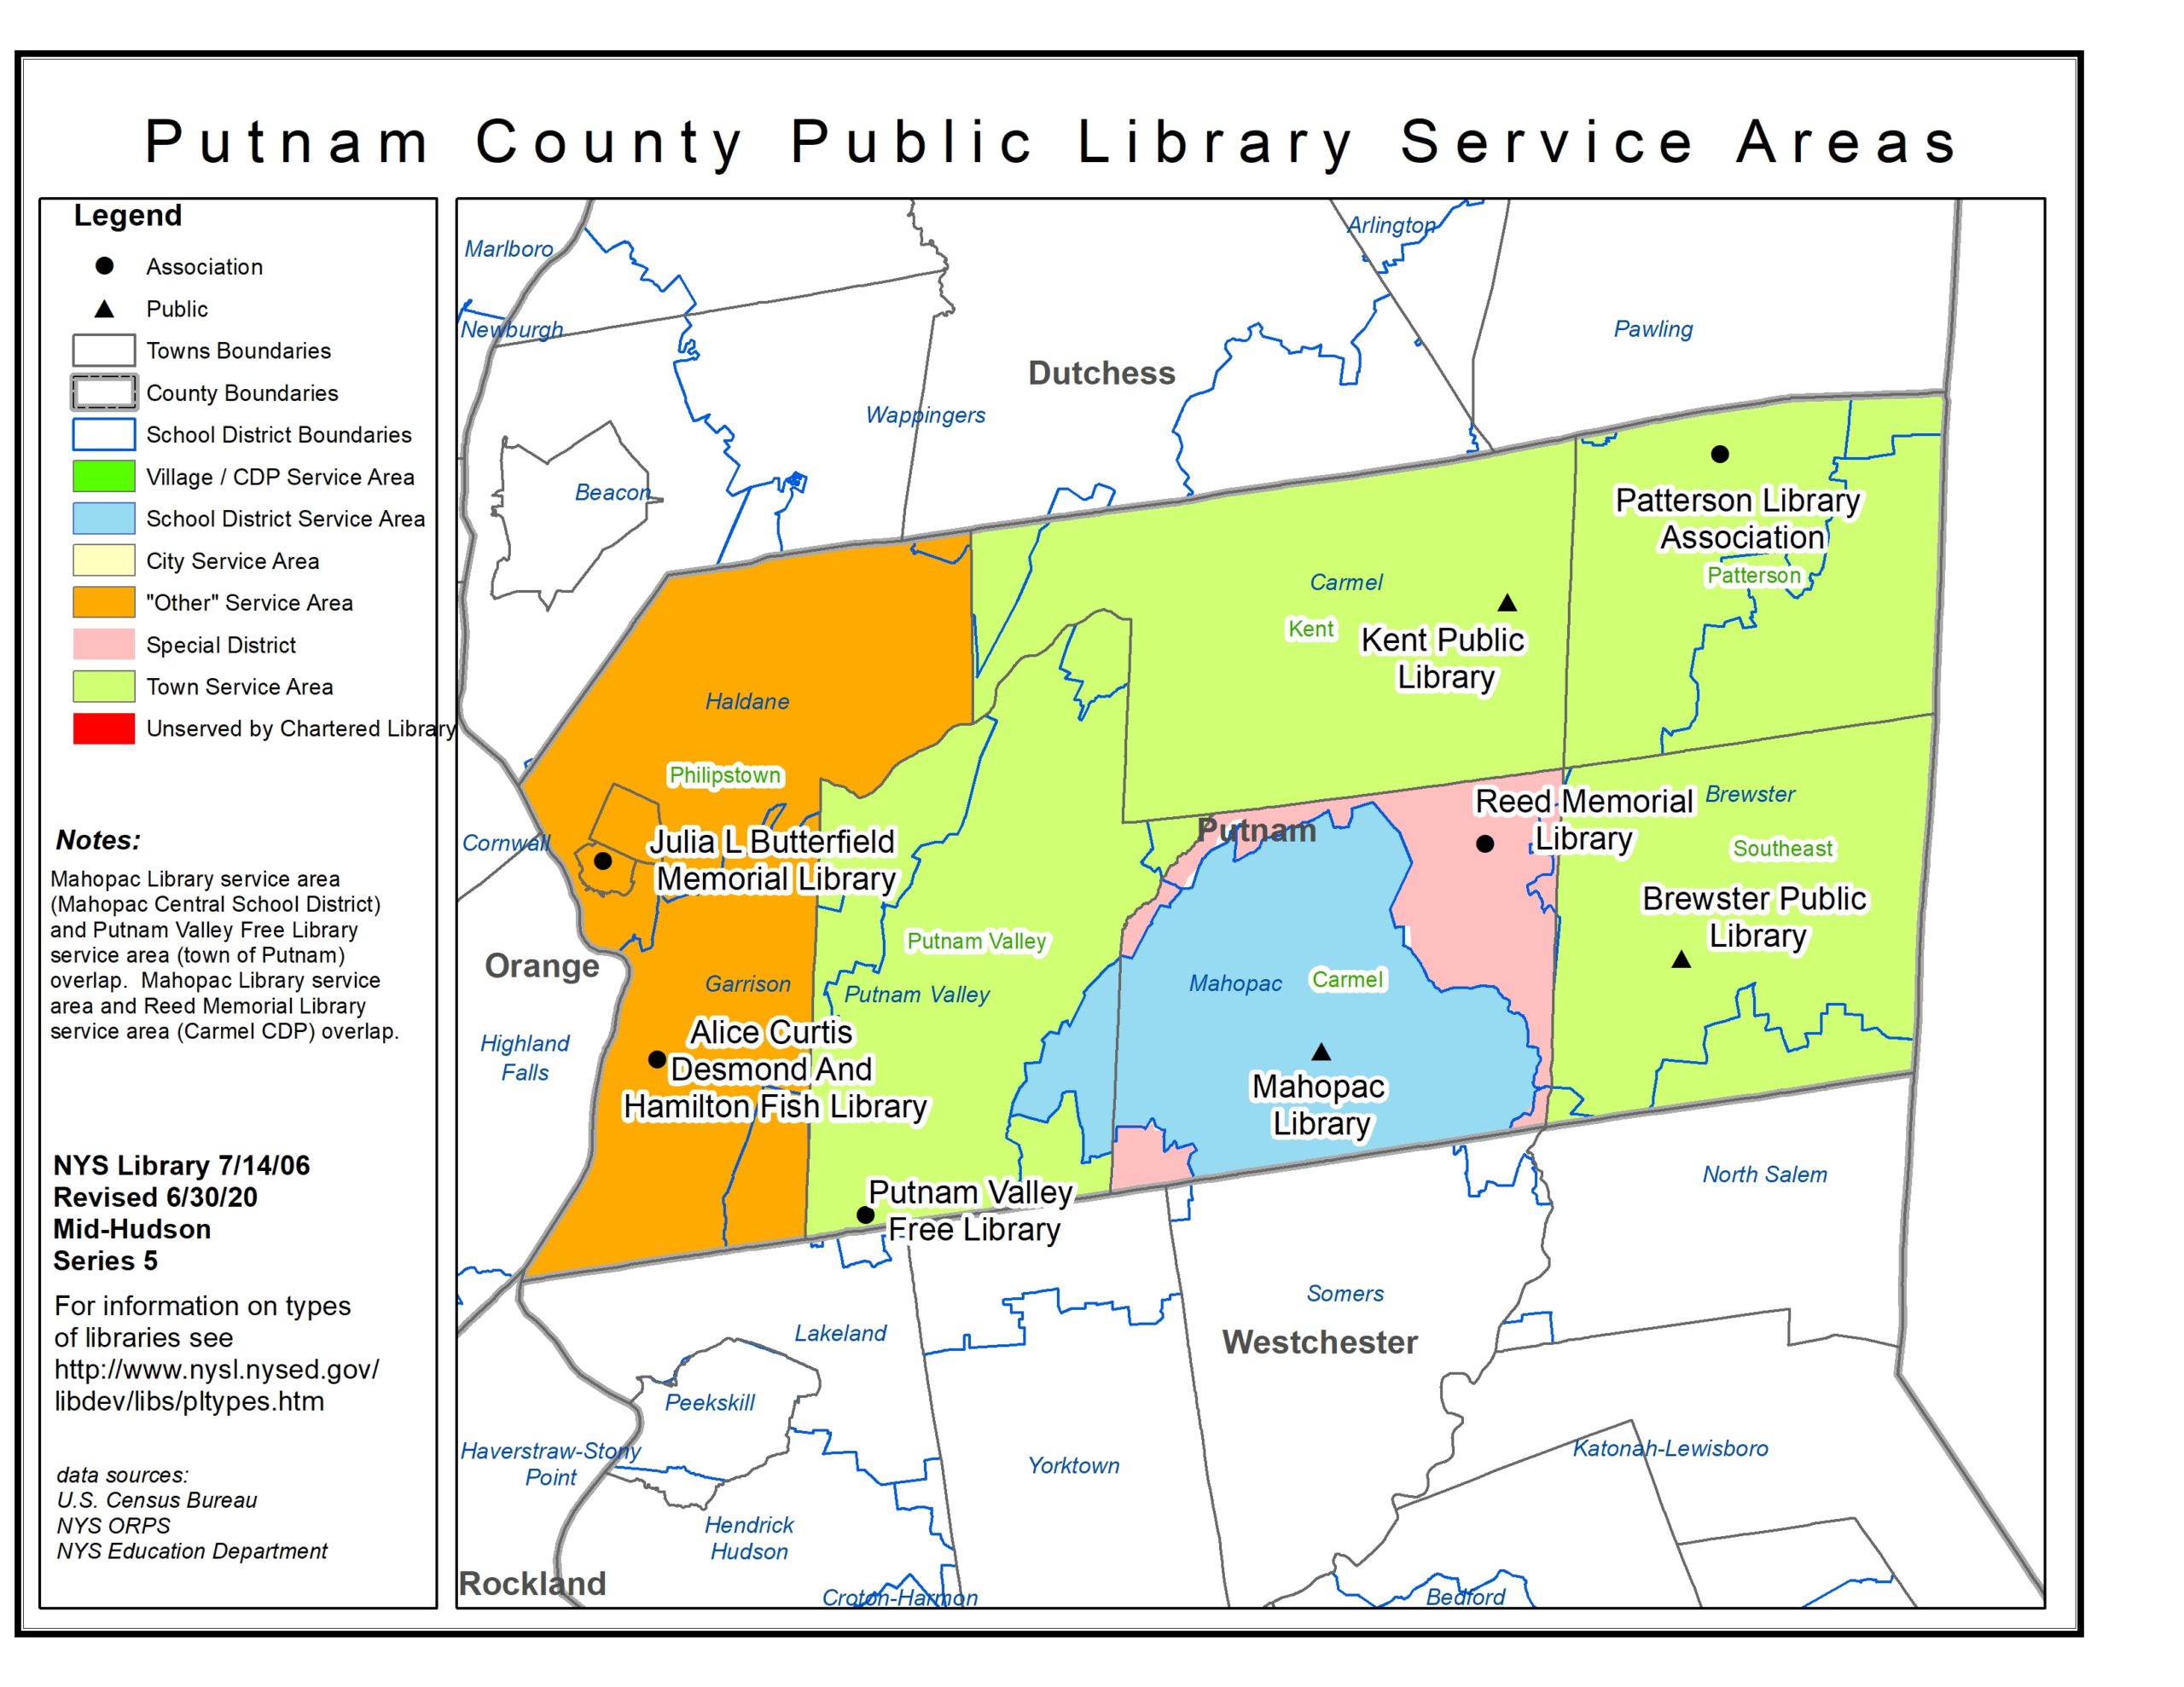 Map of Putnam County with Public Library Service Areas